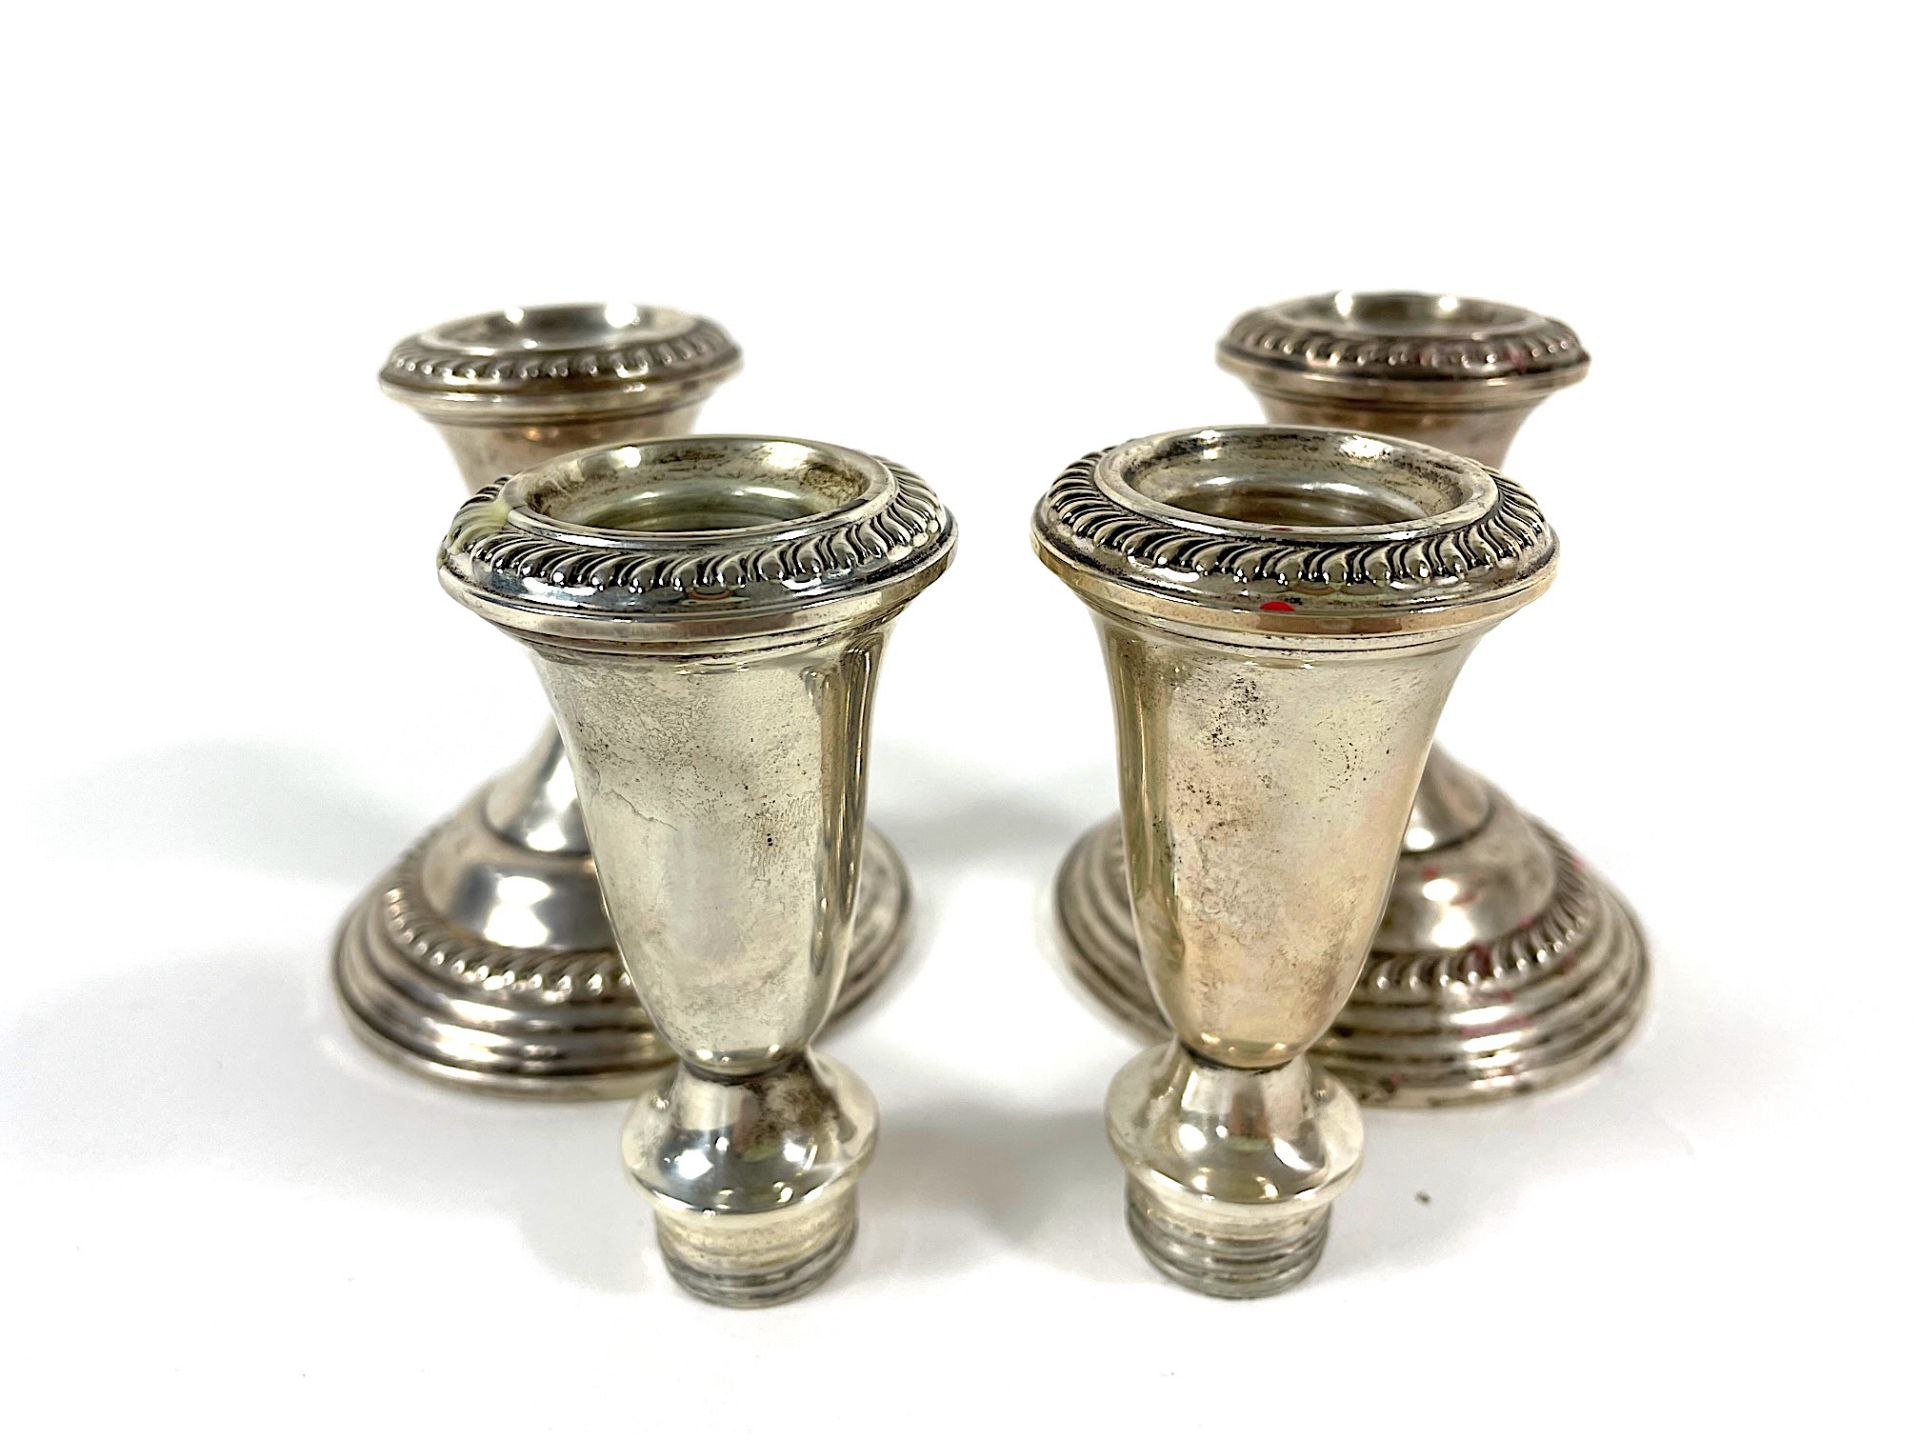 2 candlesticks 925 silver - Image 4 of 8